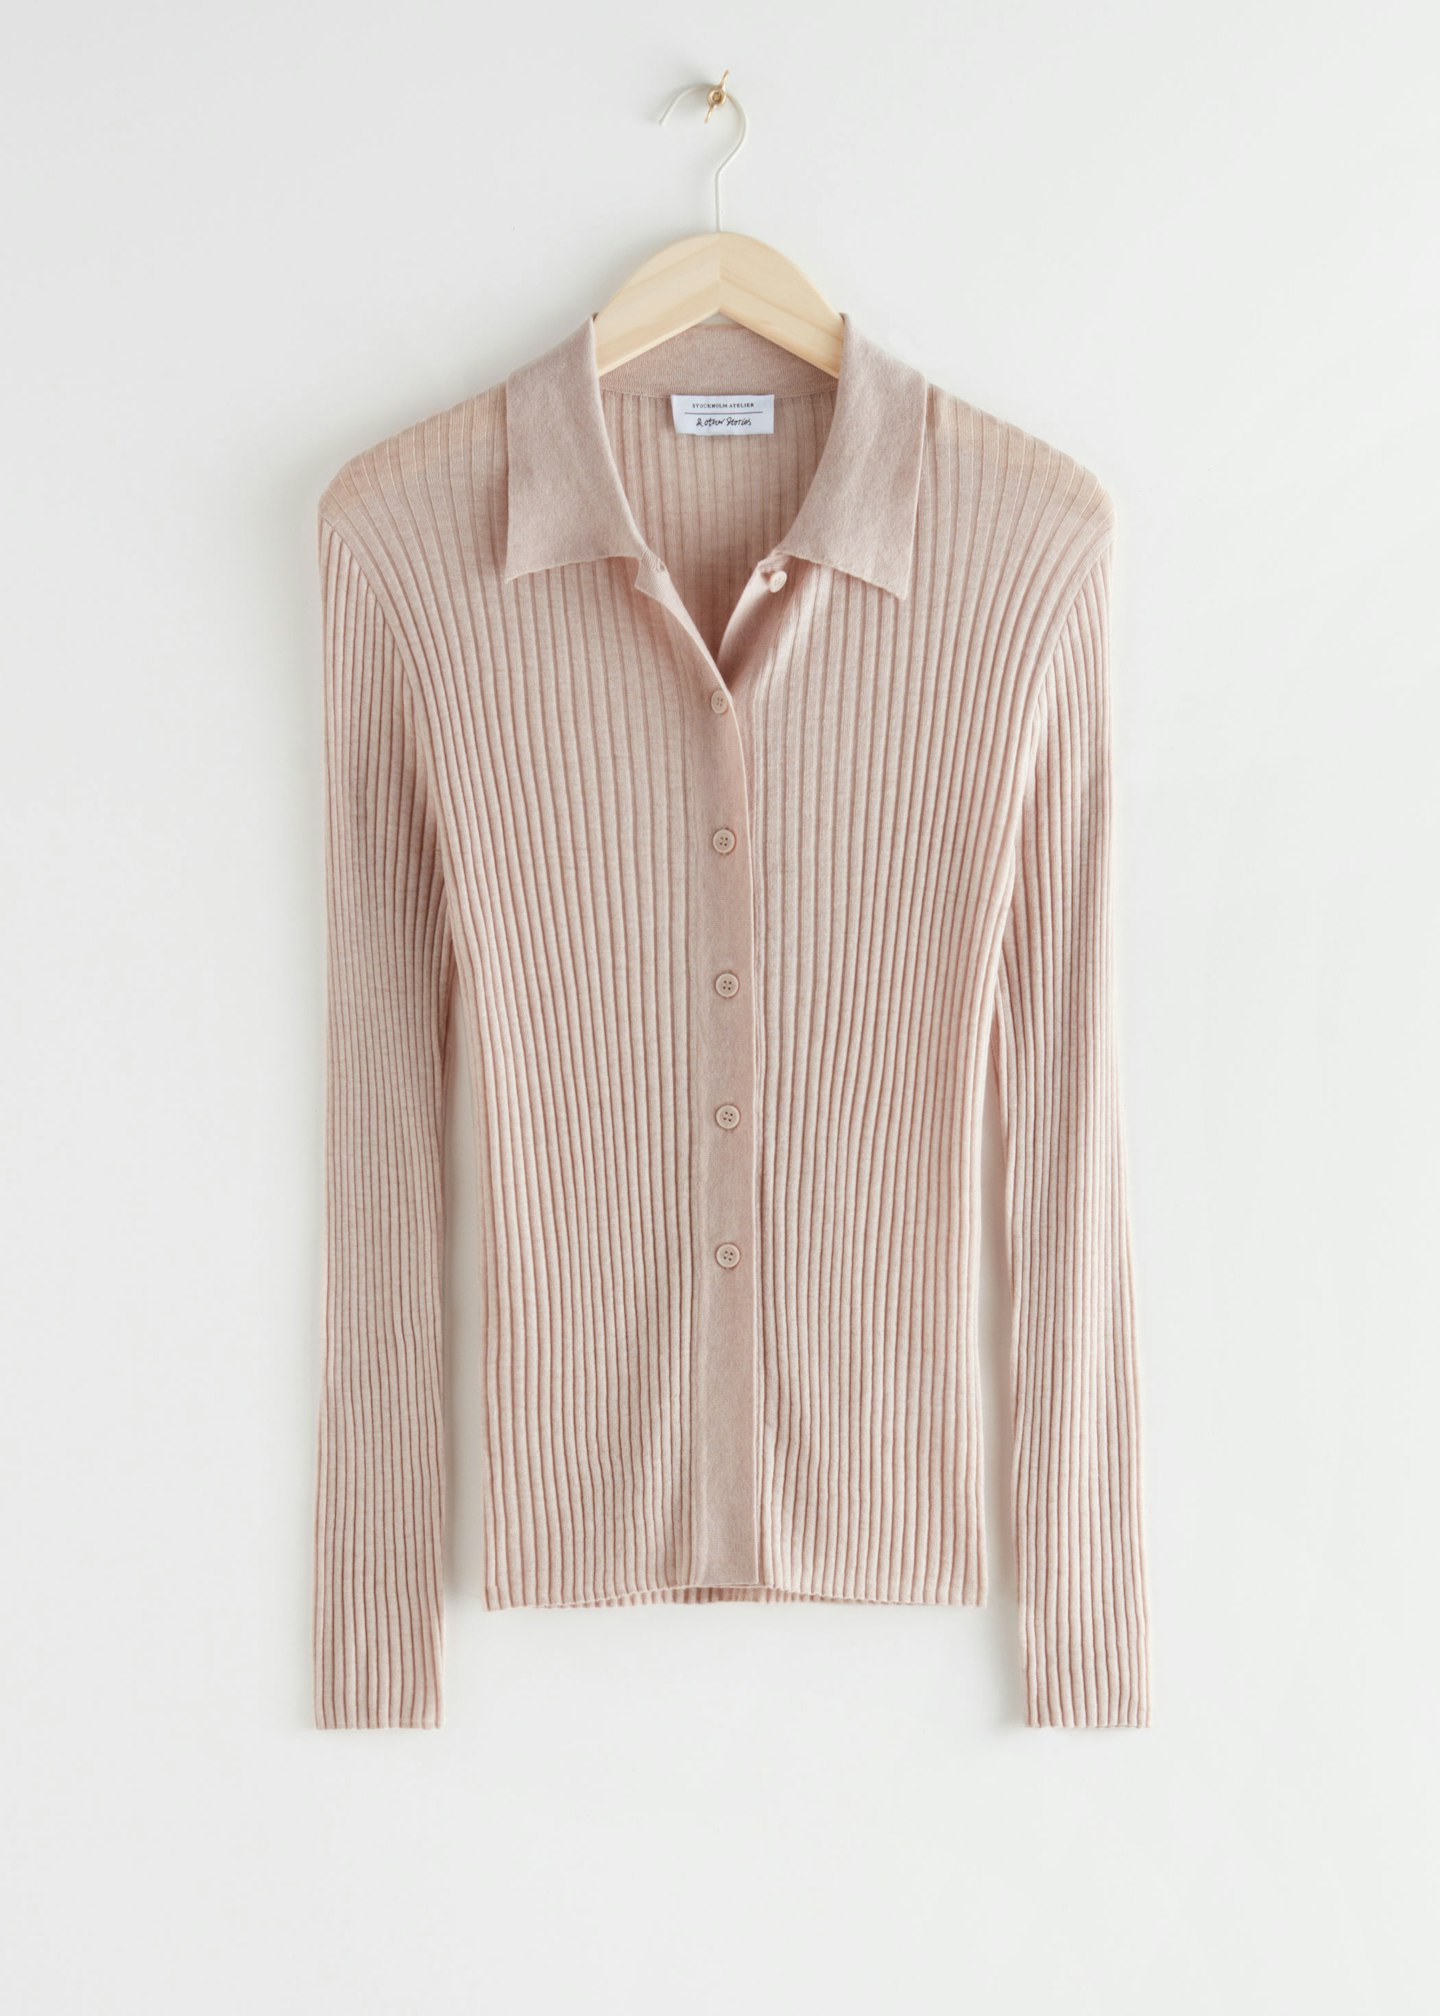 & Other Stories, Fitted Ribbed Cardigan, £65